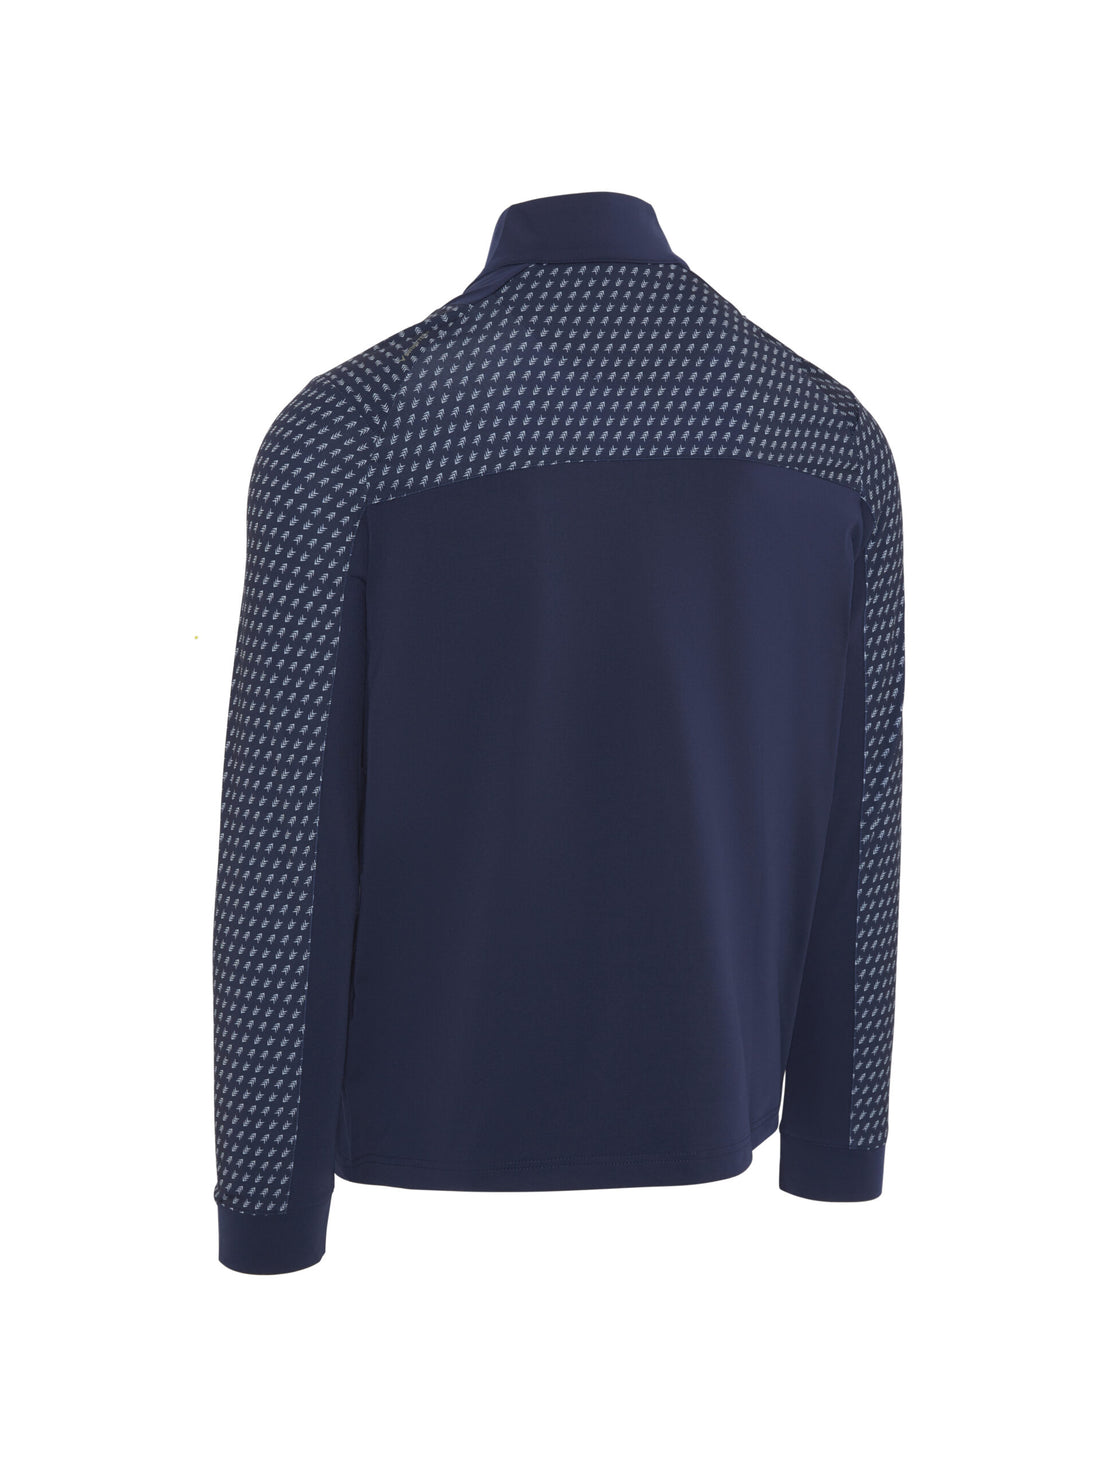 Callaway Chev Motion Print Pullover